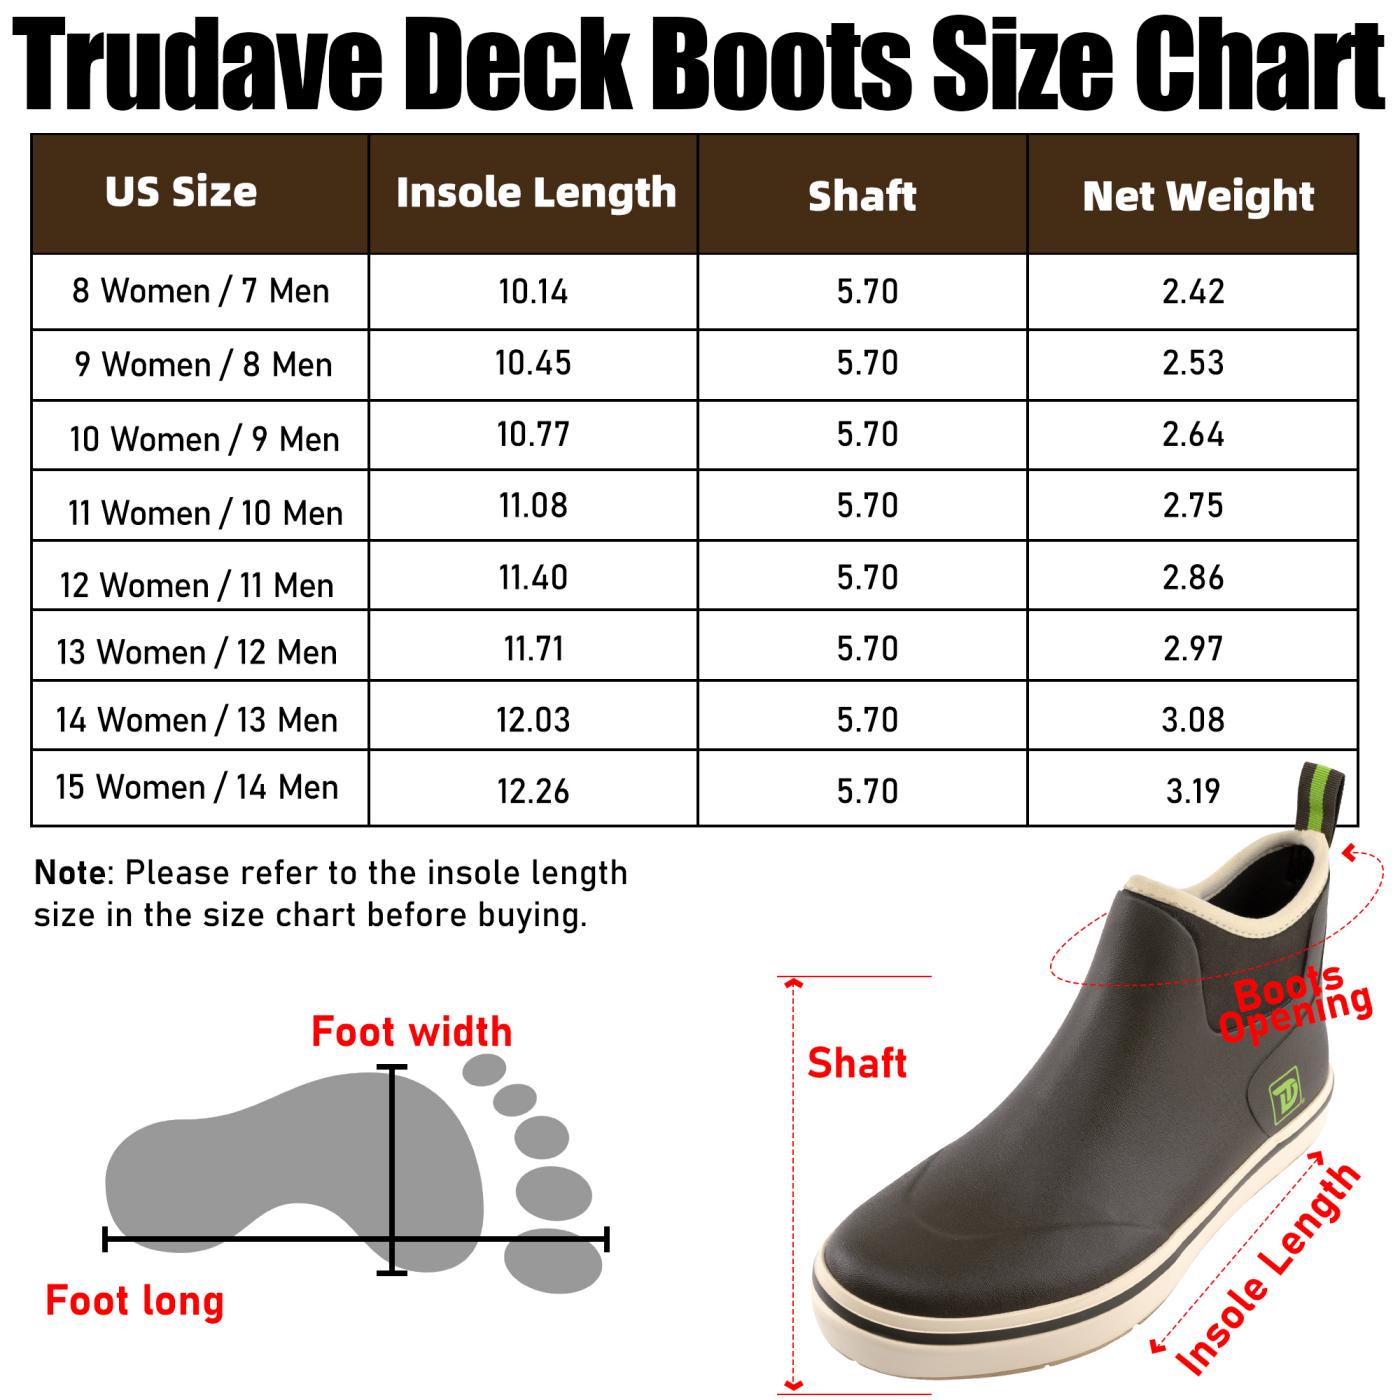 Trudave 5.7 INCH Fishing Deck Boots - Black